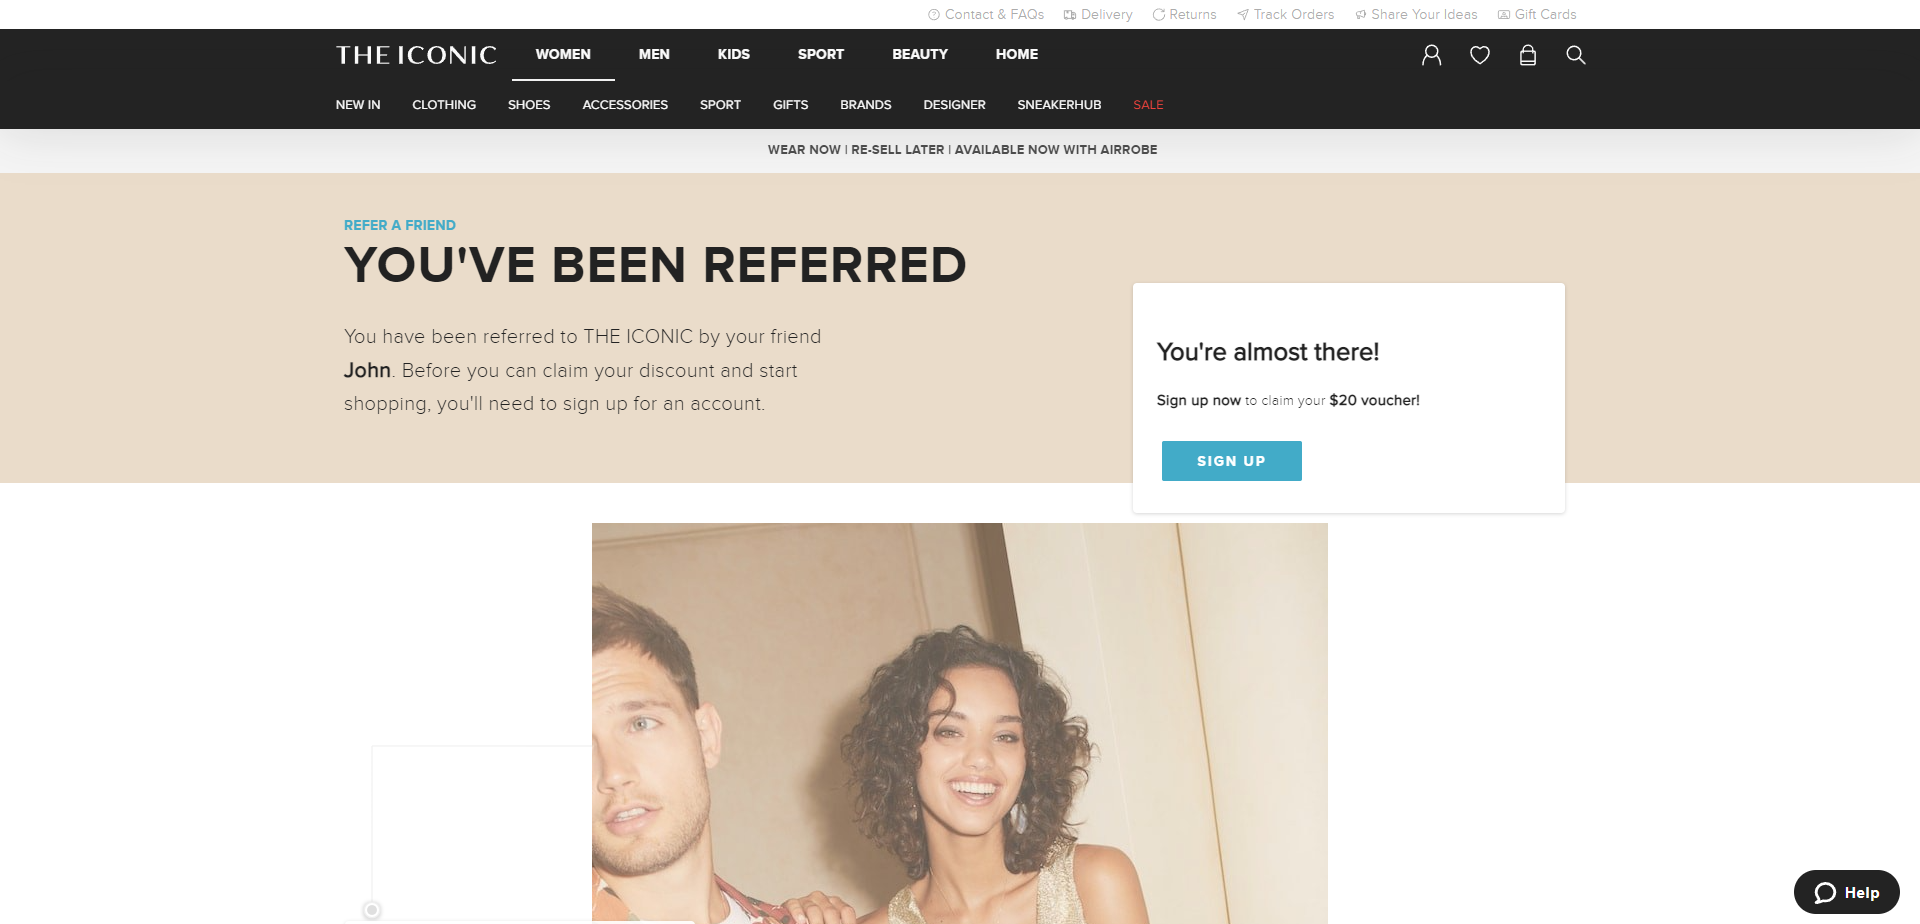 Referral Landing Page for The iconic